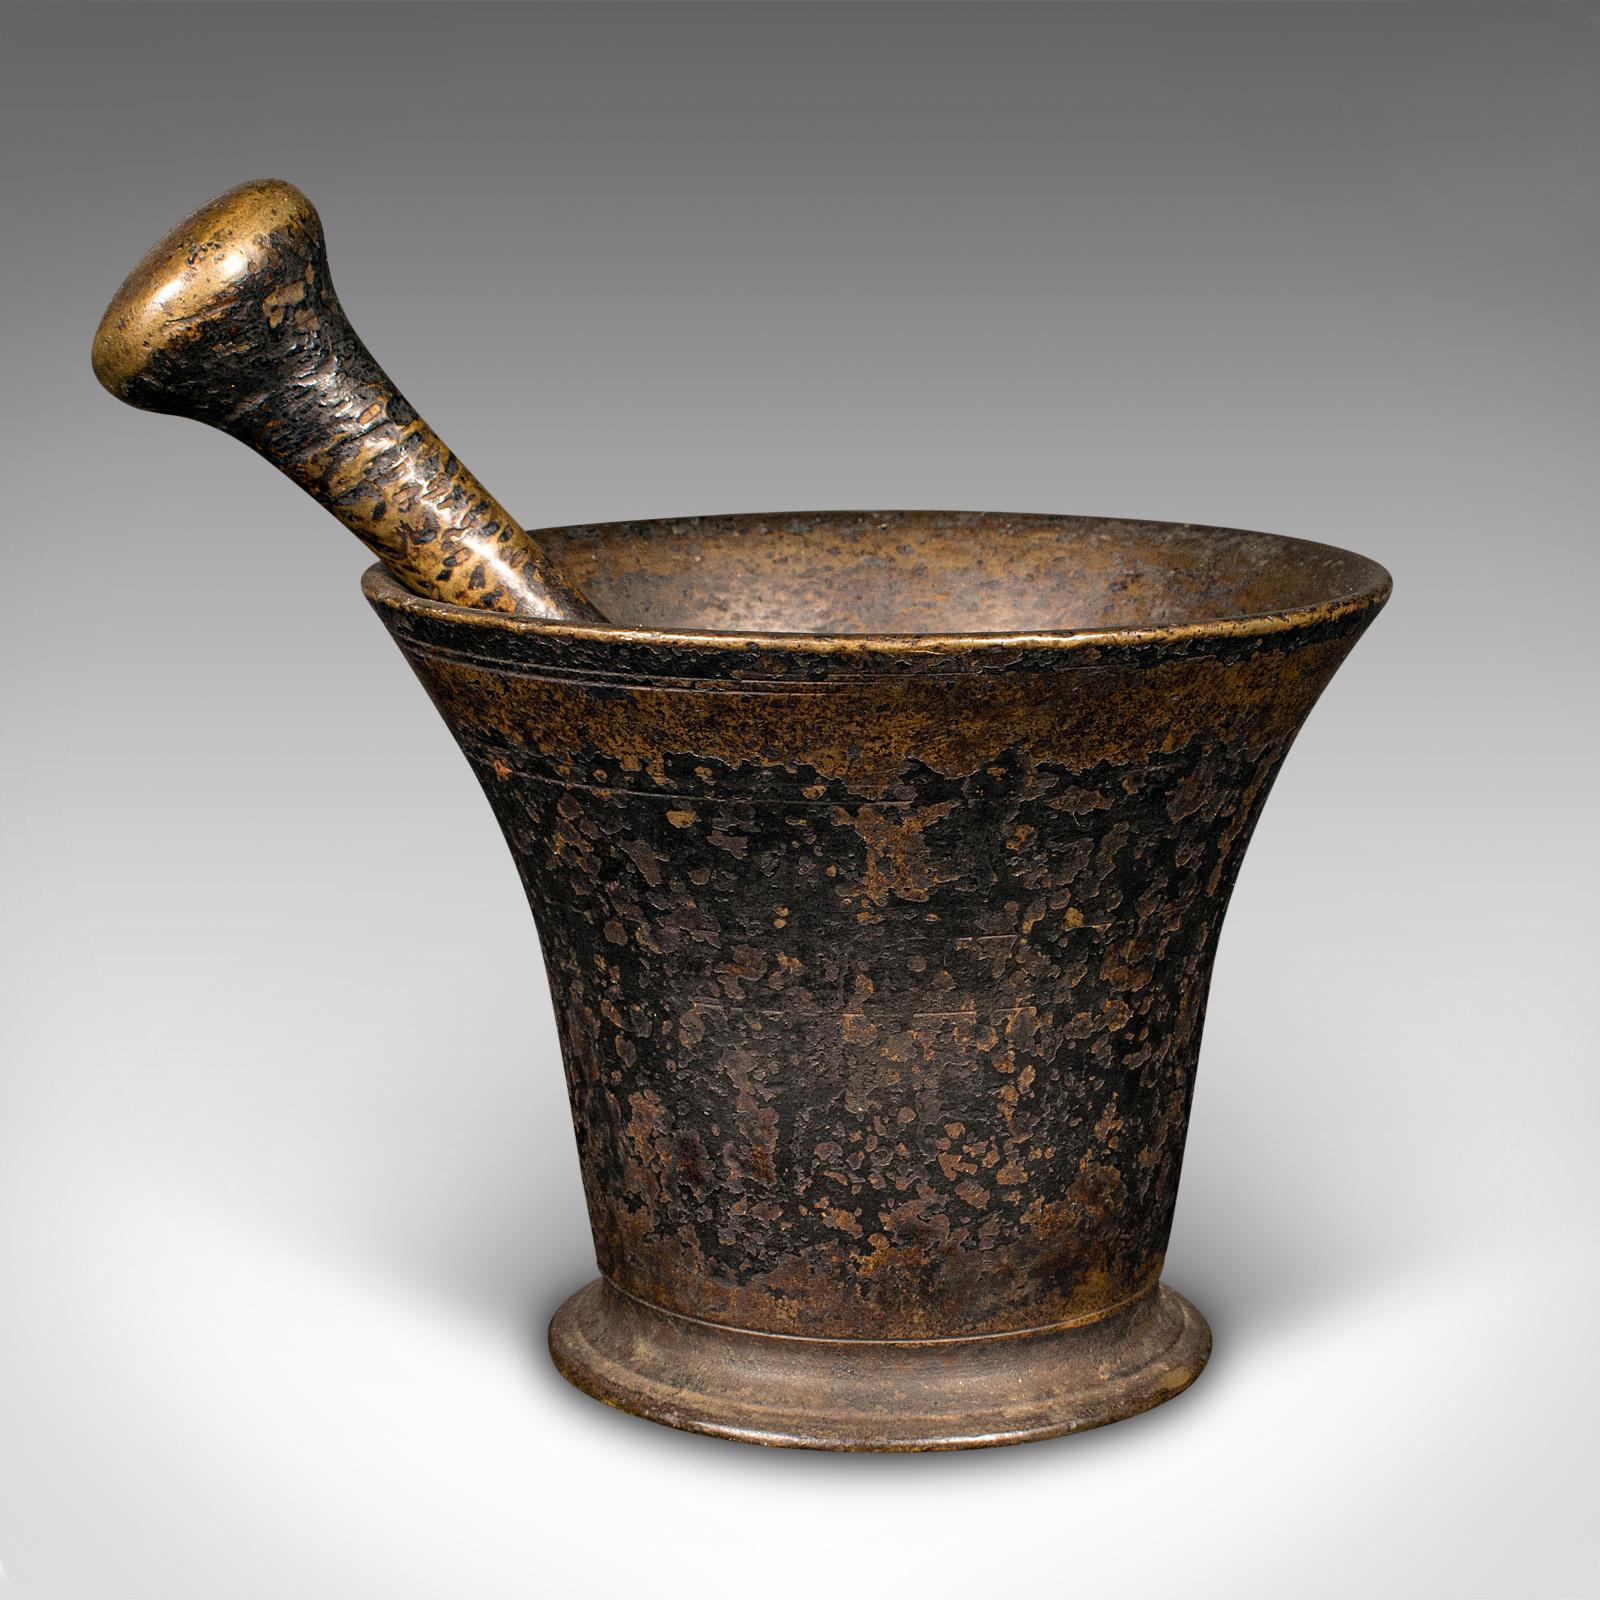 Antique Chemist's Mortar & Pestle, English, Bronze, Apothecary, Georgian, C.1720 In Good Condition For Sale In Hele, Devon, GB